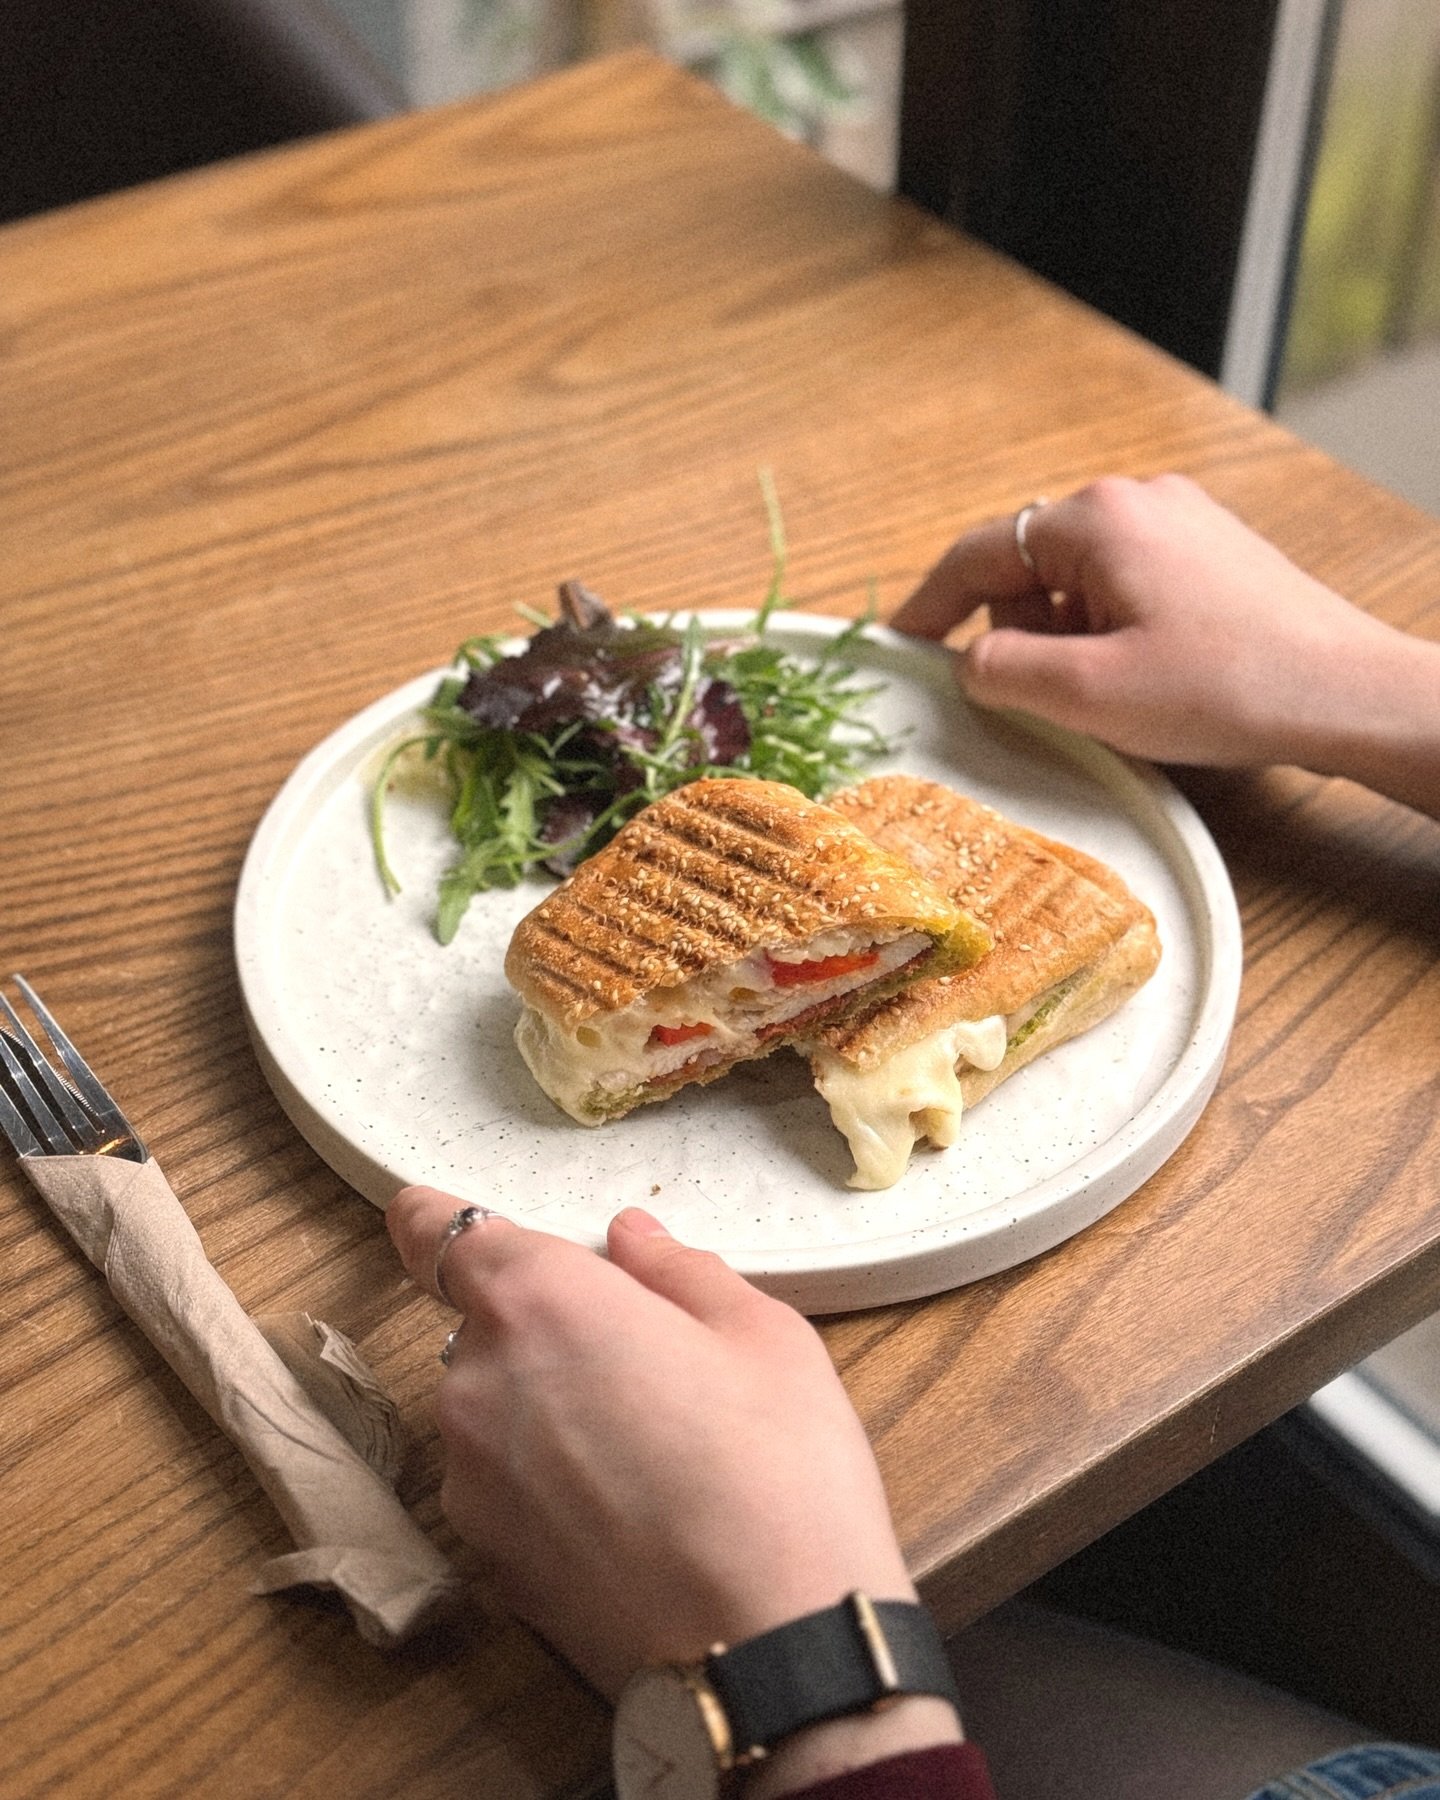 Taking a moment to admire the sheer deliciousness of our Chicken and Chorizo Panini. From the perfectly grilled ciabatta to the mouthwatering blend of flavors within, it&rsquo;s a work of culinary art. Come see&mdash;and taste&mdash;for yourself why 